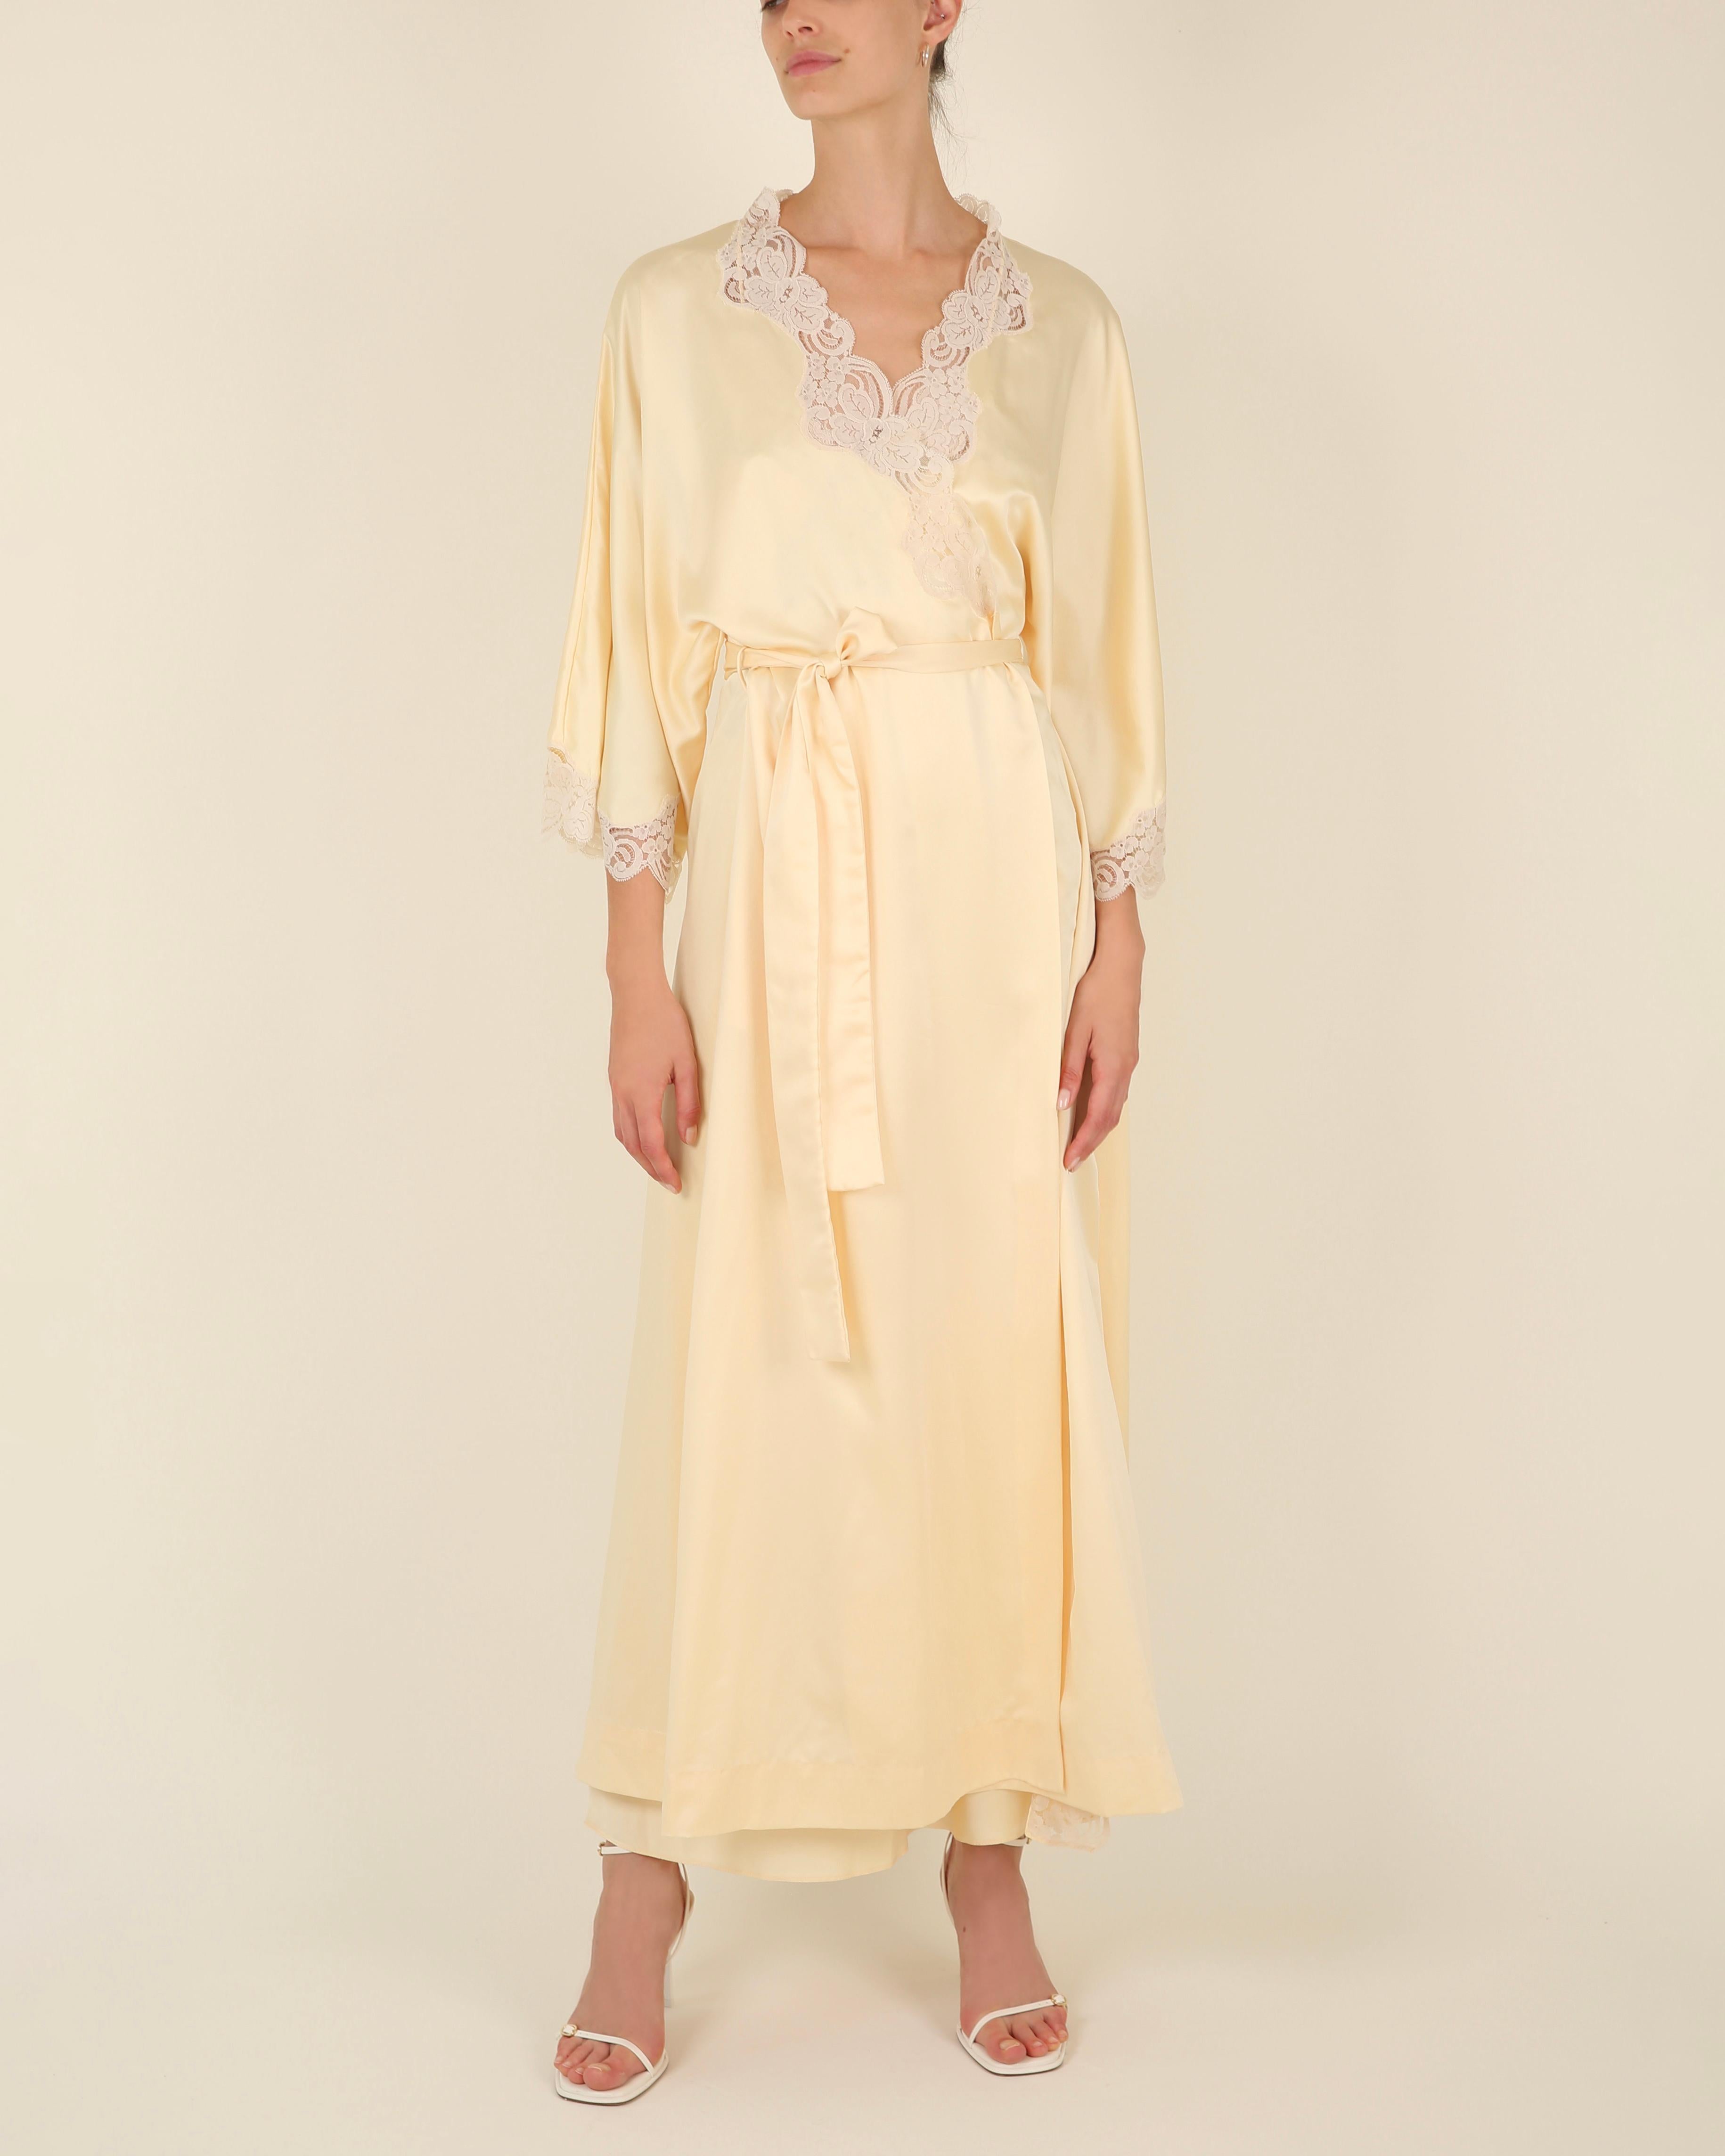 Vintage 1970's silk lace yellow backless thigh slit night gown slip dress & robe 13